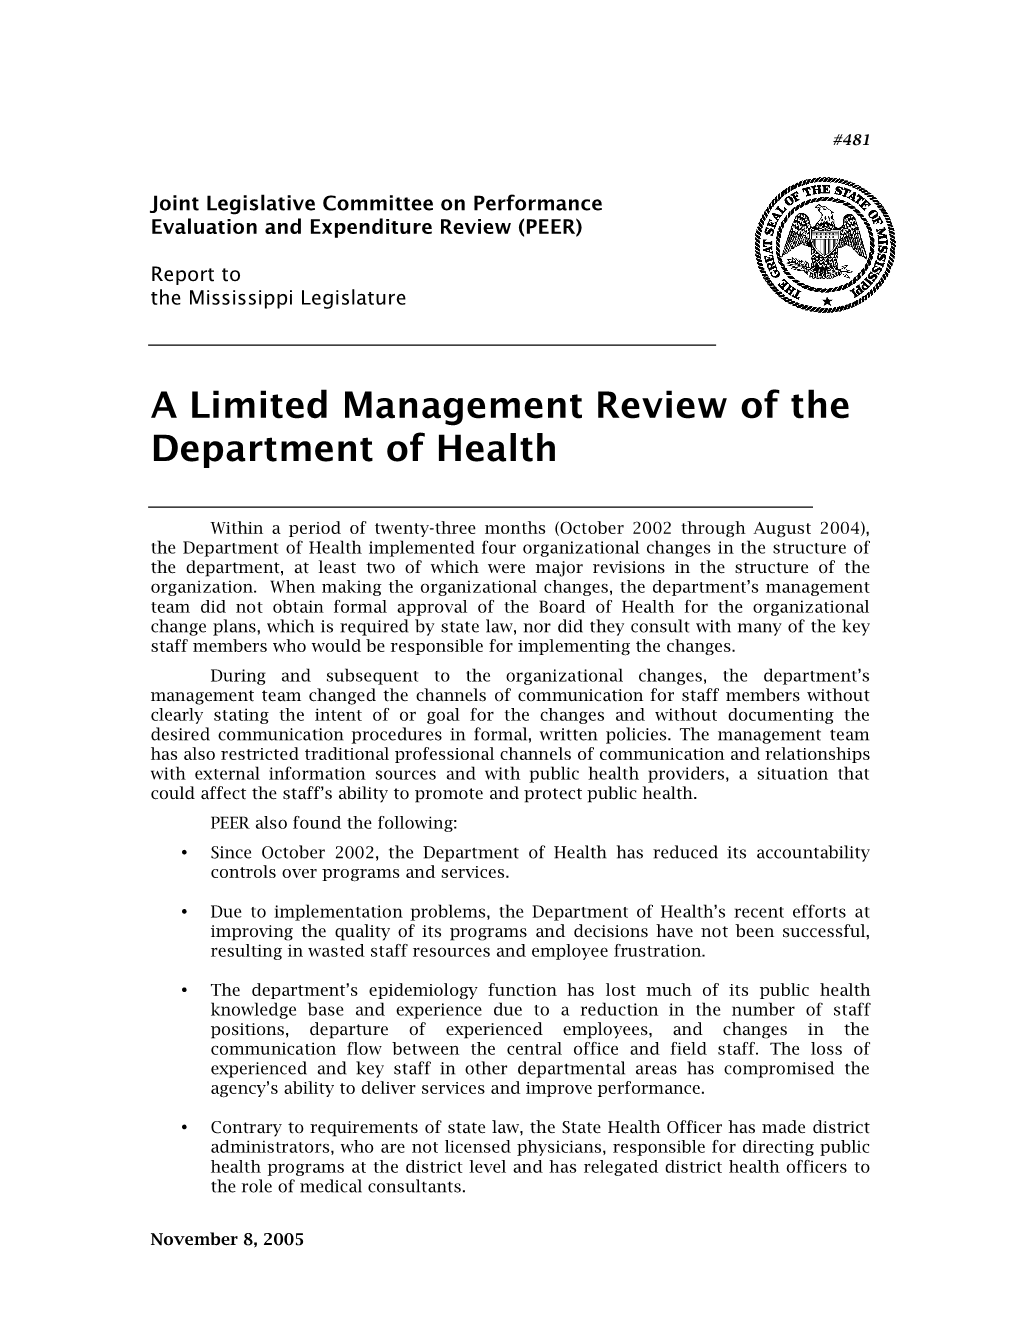 A Limited Management Review of the Department of Health